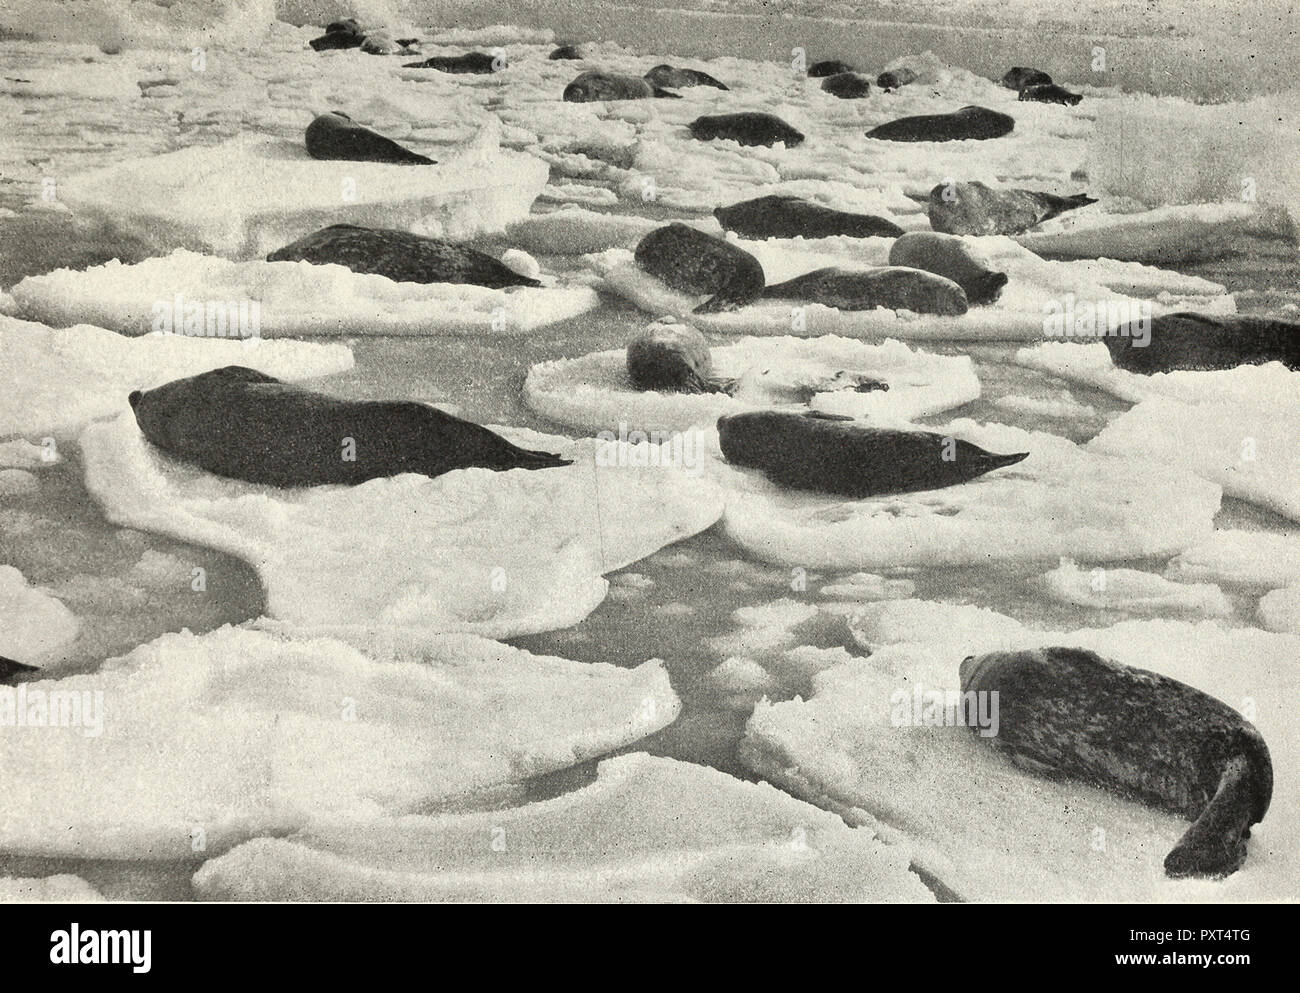 A Mid-summer scene in the Boat Harbour, Main Base. Weddell seals basking on 'Pancake' Floes, circa 1910 Stock Photo